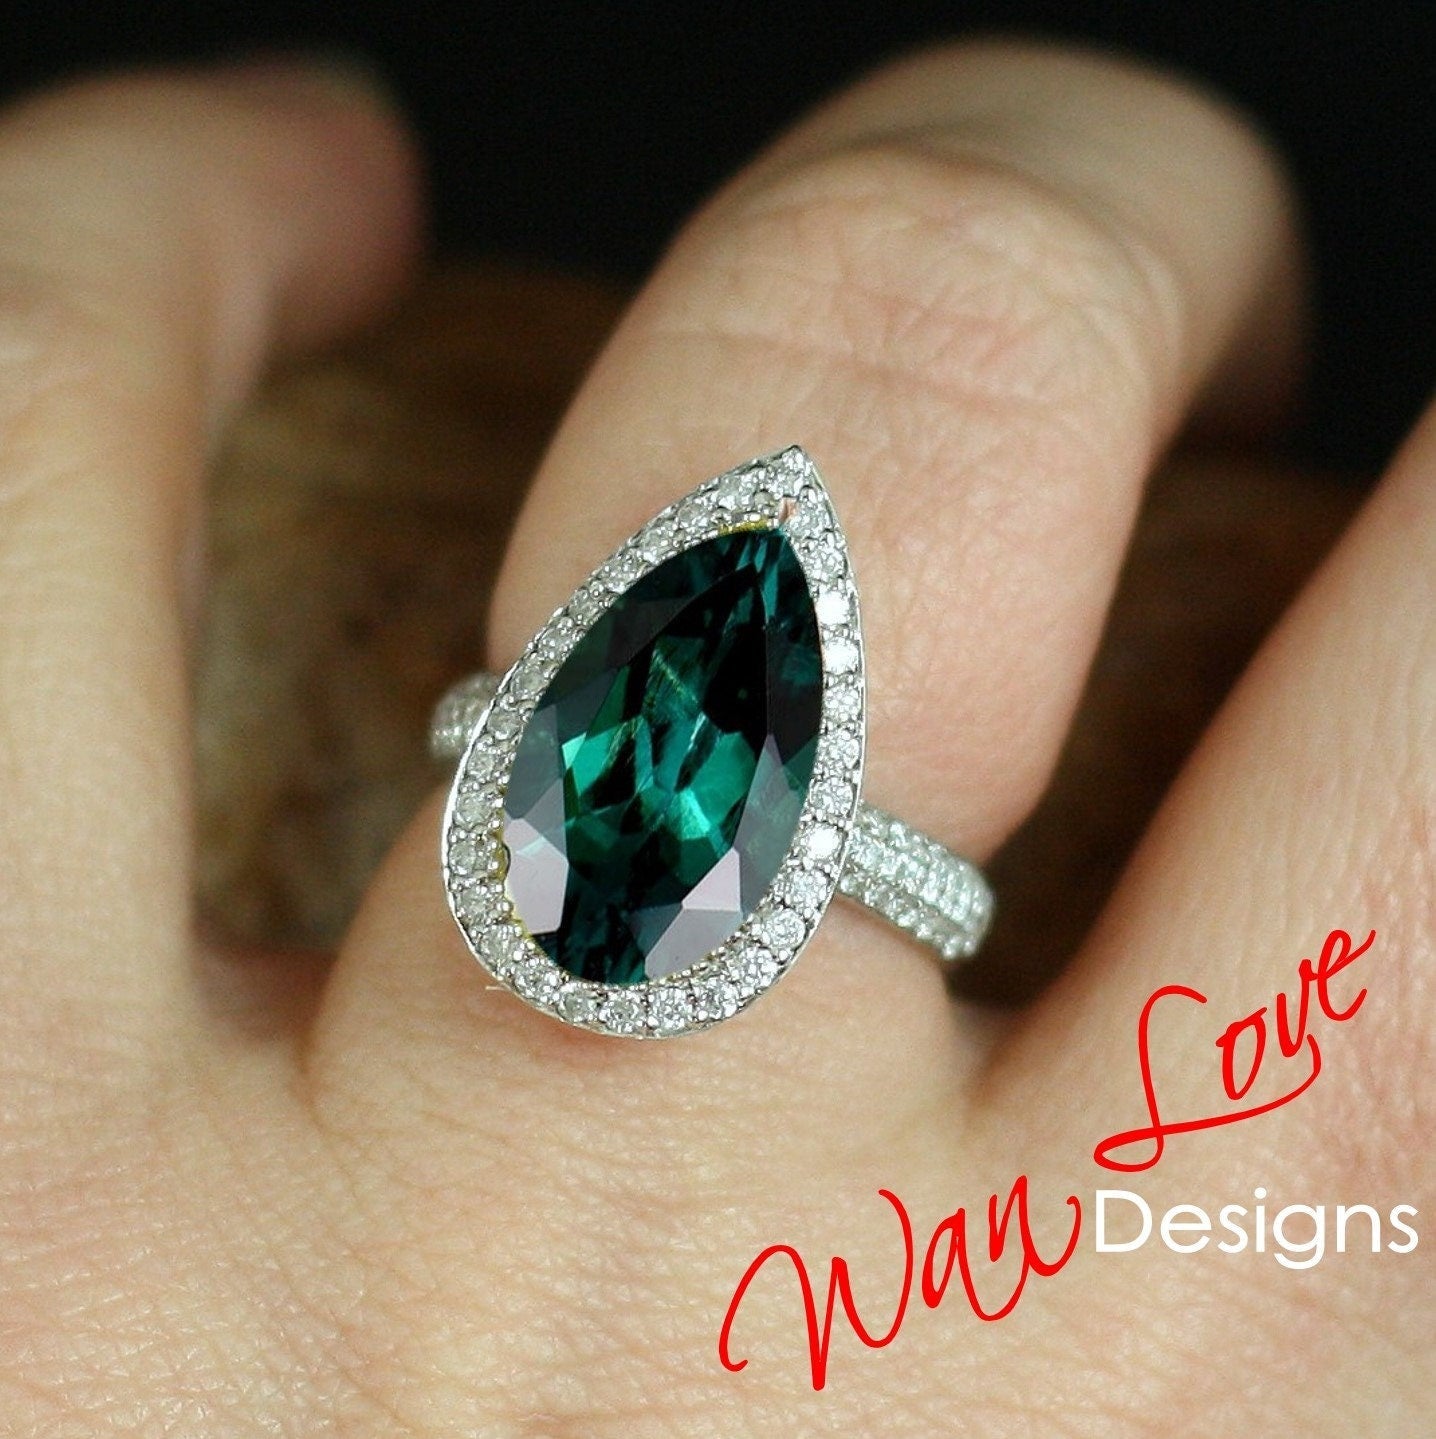 Emerald & Diamond Pear Halo Engagement Ring, 6.5ct, 16x9mm, Custom made for you, Wedding, Anniversary Gift, Proposal, Statement, Large Wan Love Designs